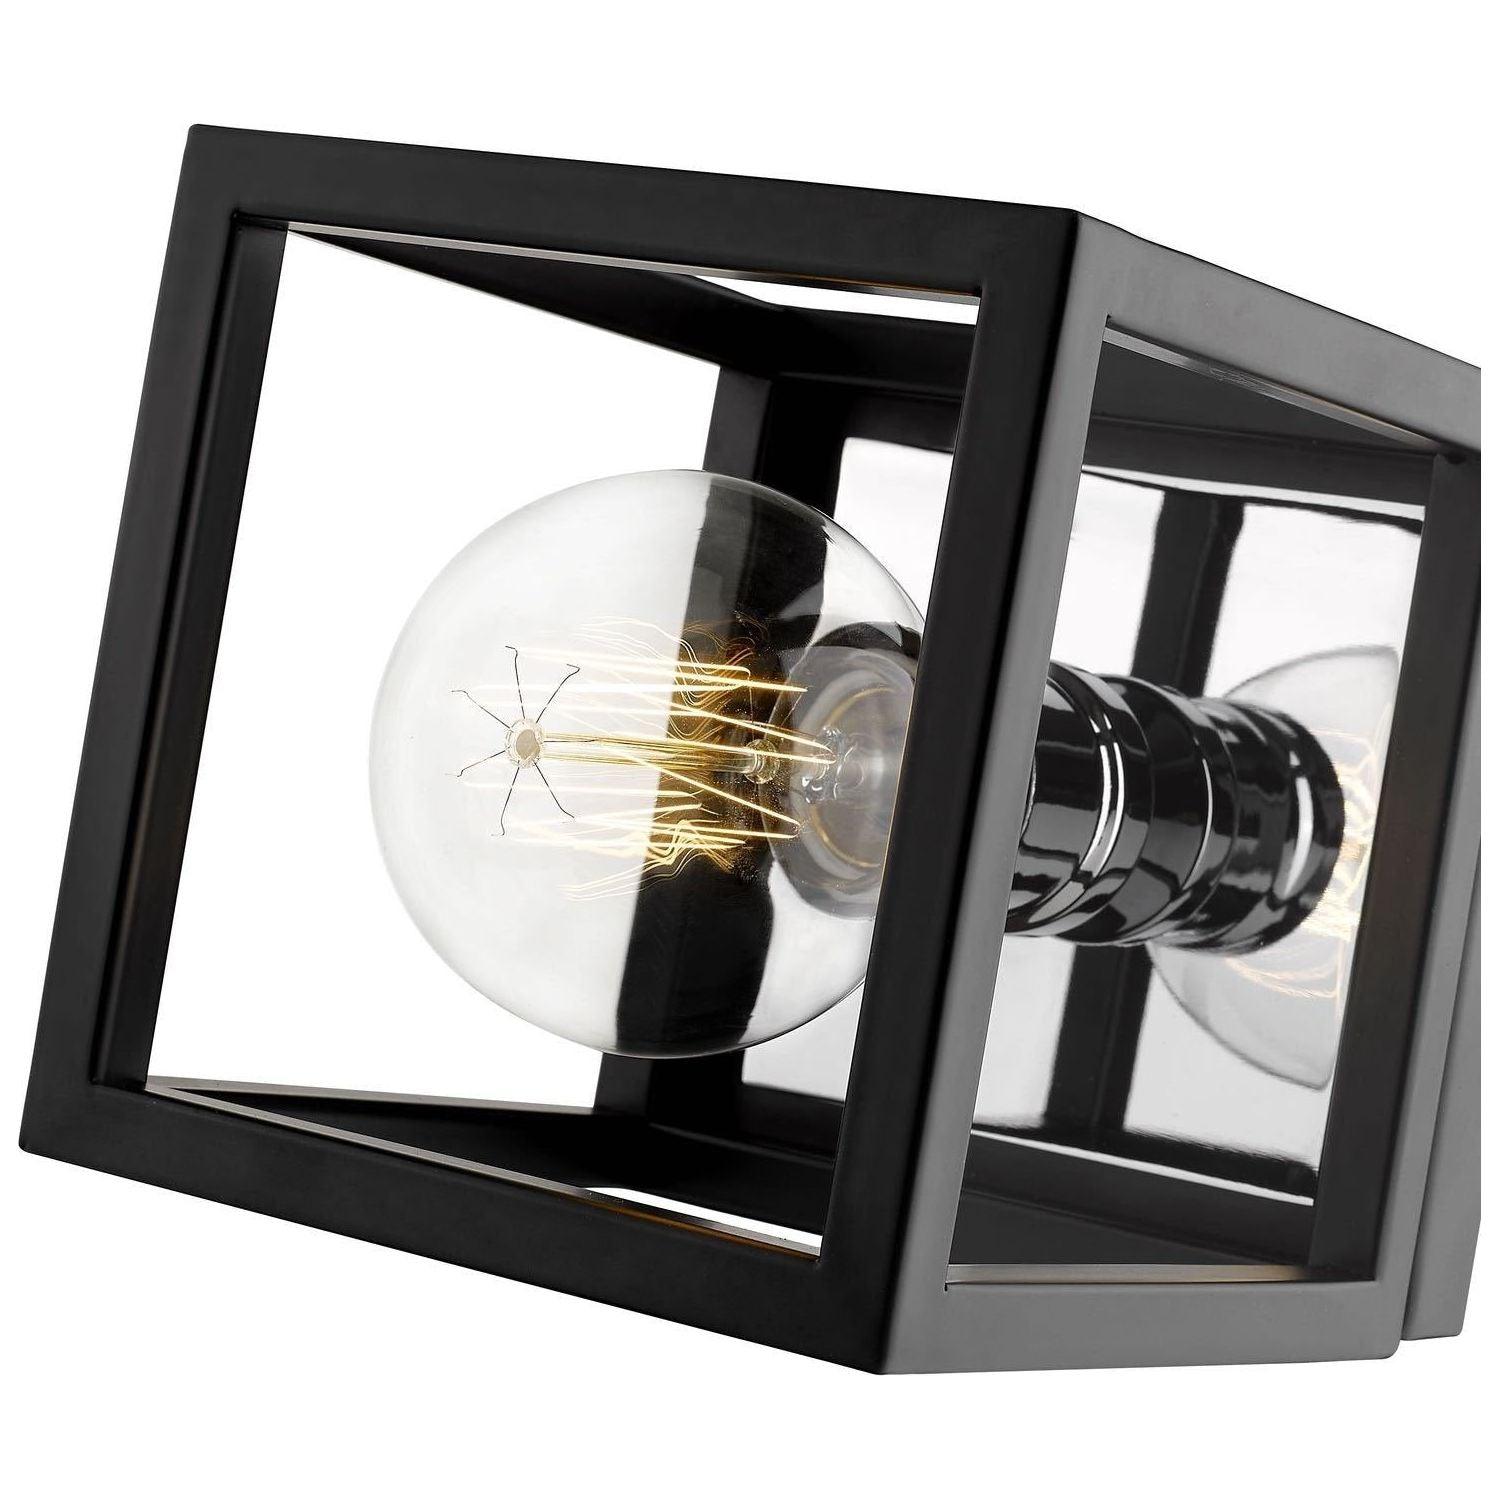 Z-Lite - Kube Wall Sconce - Lights Canada